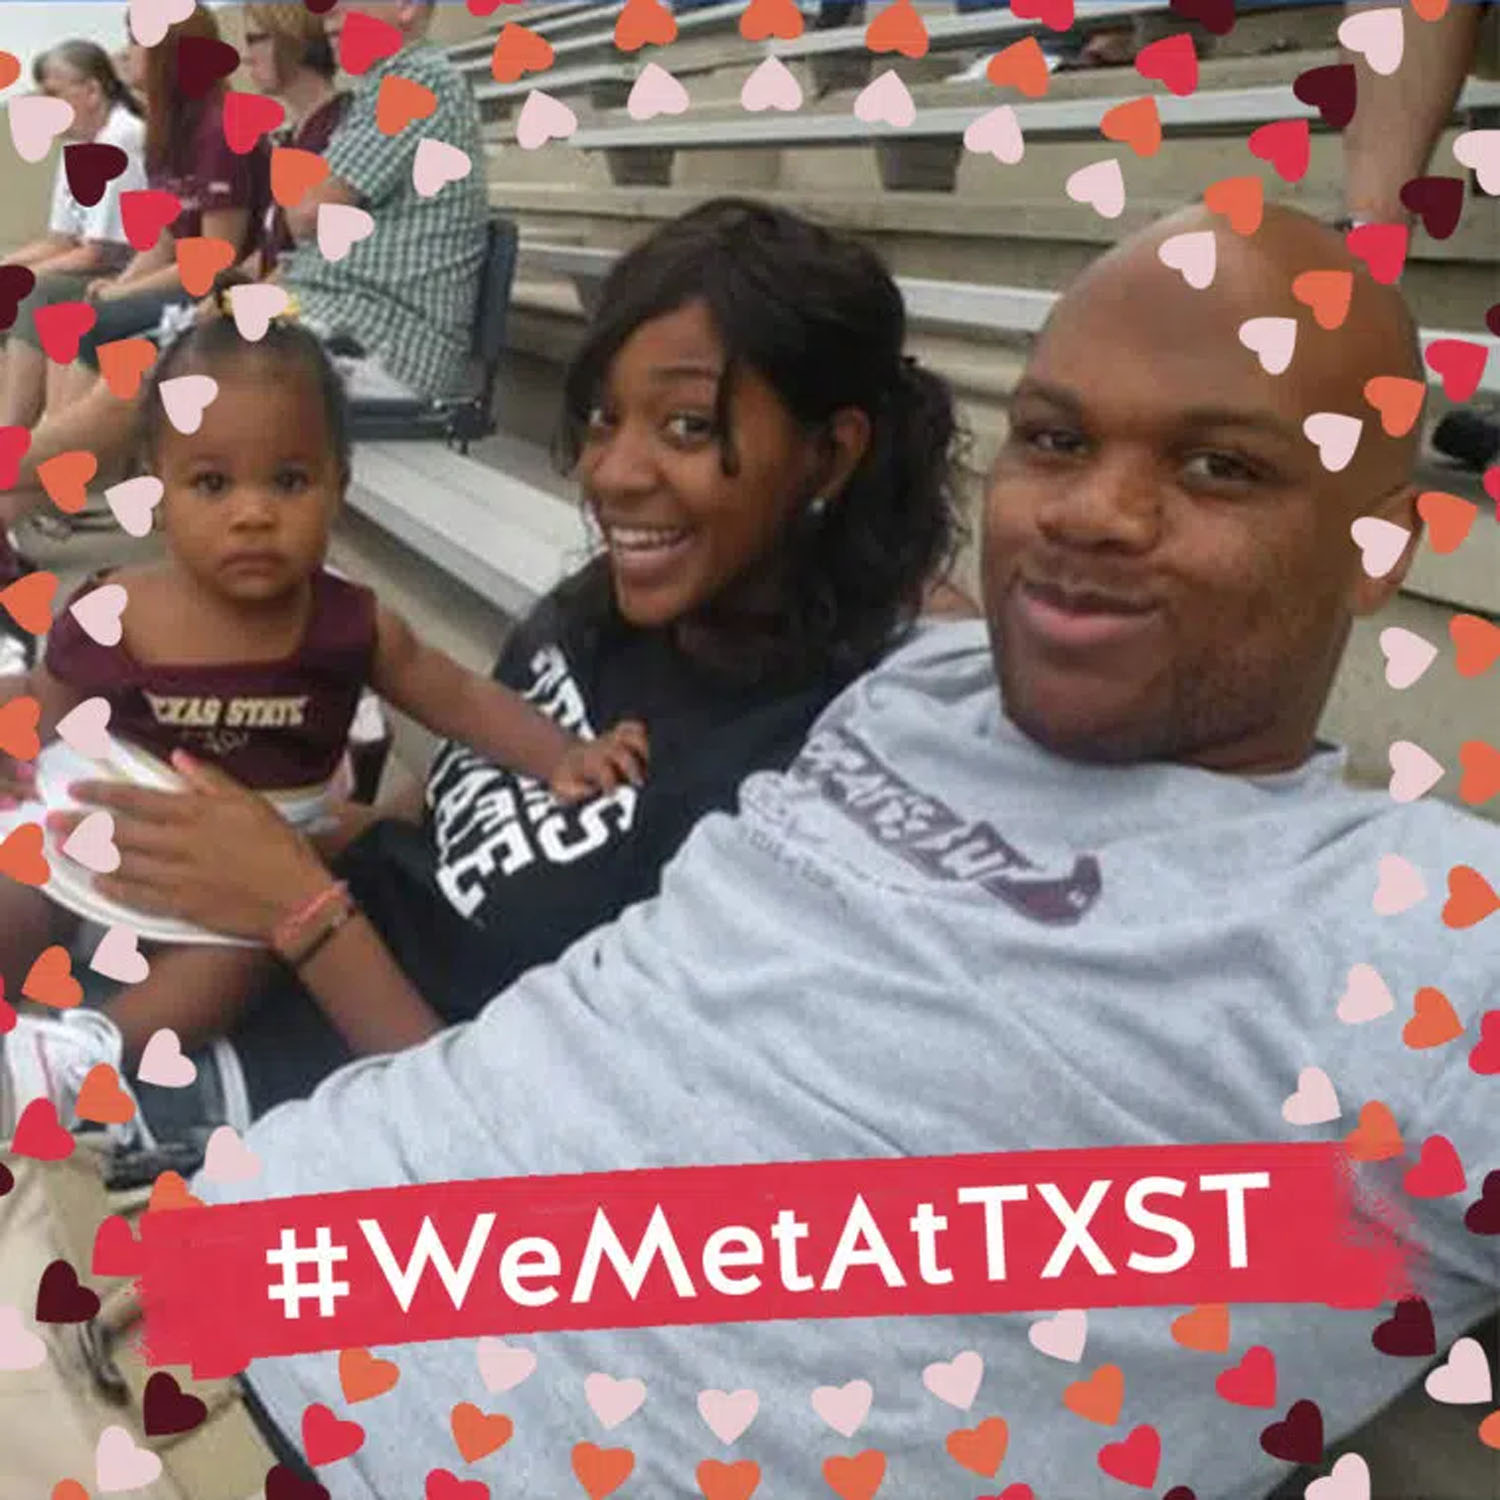 Couple with baby, with frame overlay that says #WeMetAtTXST